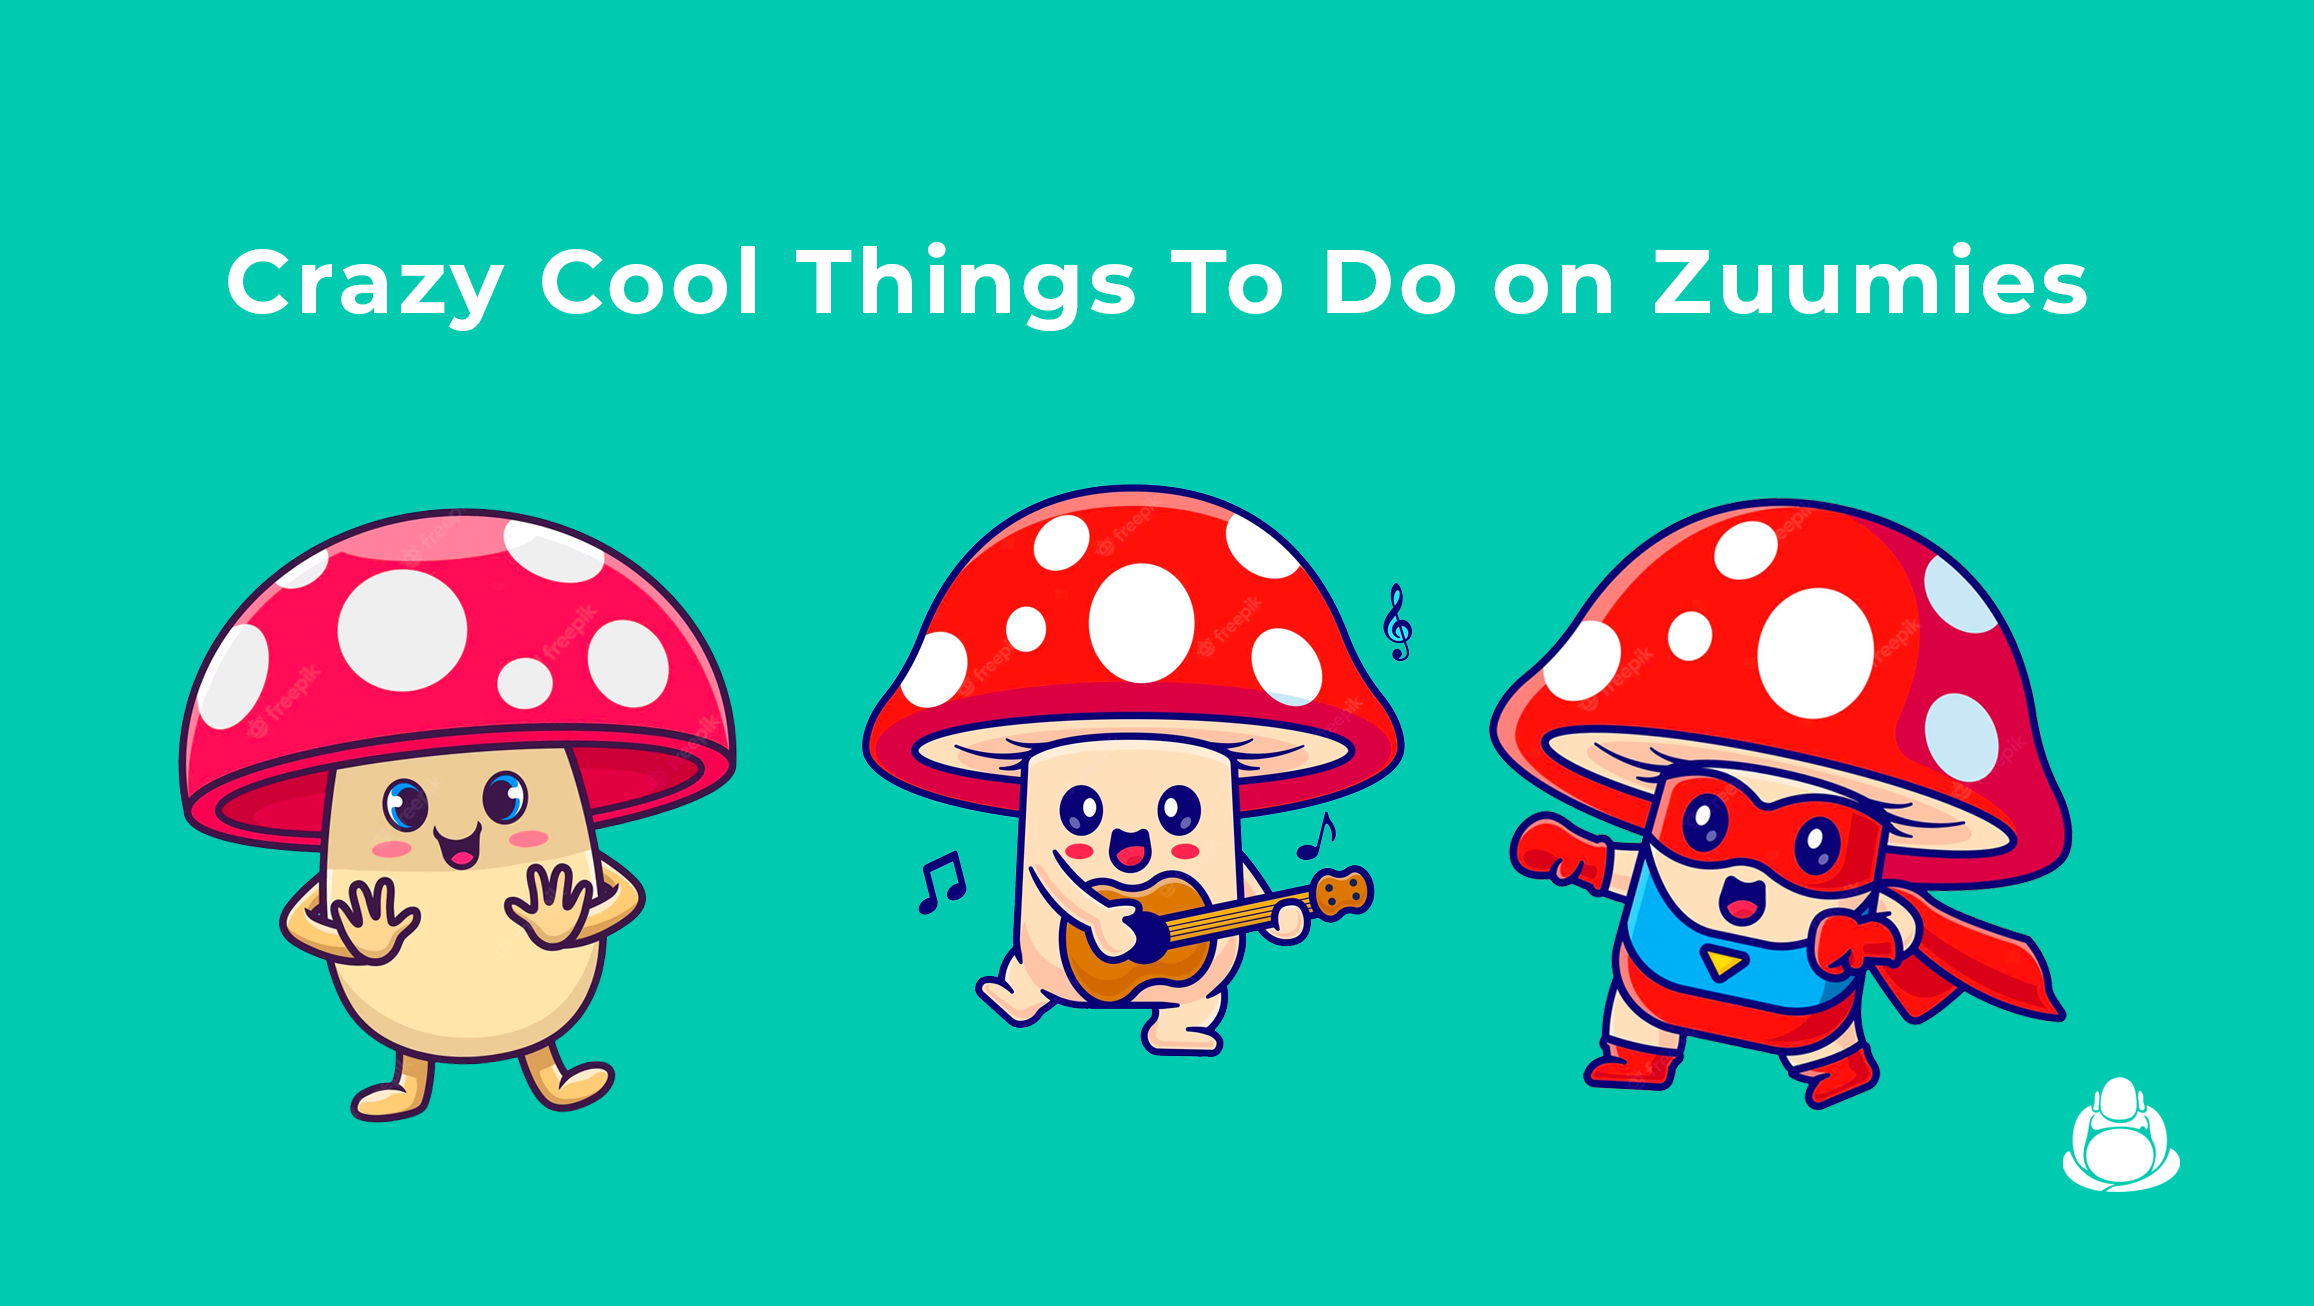 Crazy Cool Things to Do While Zooming on Zuumies